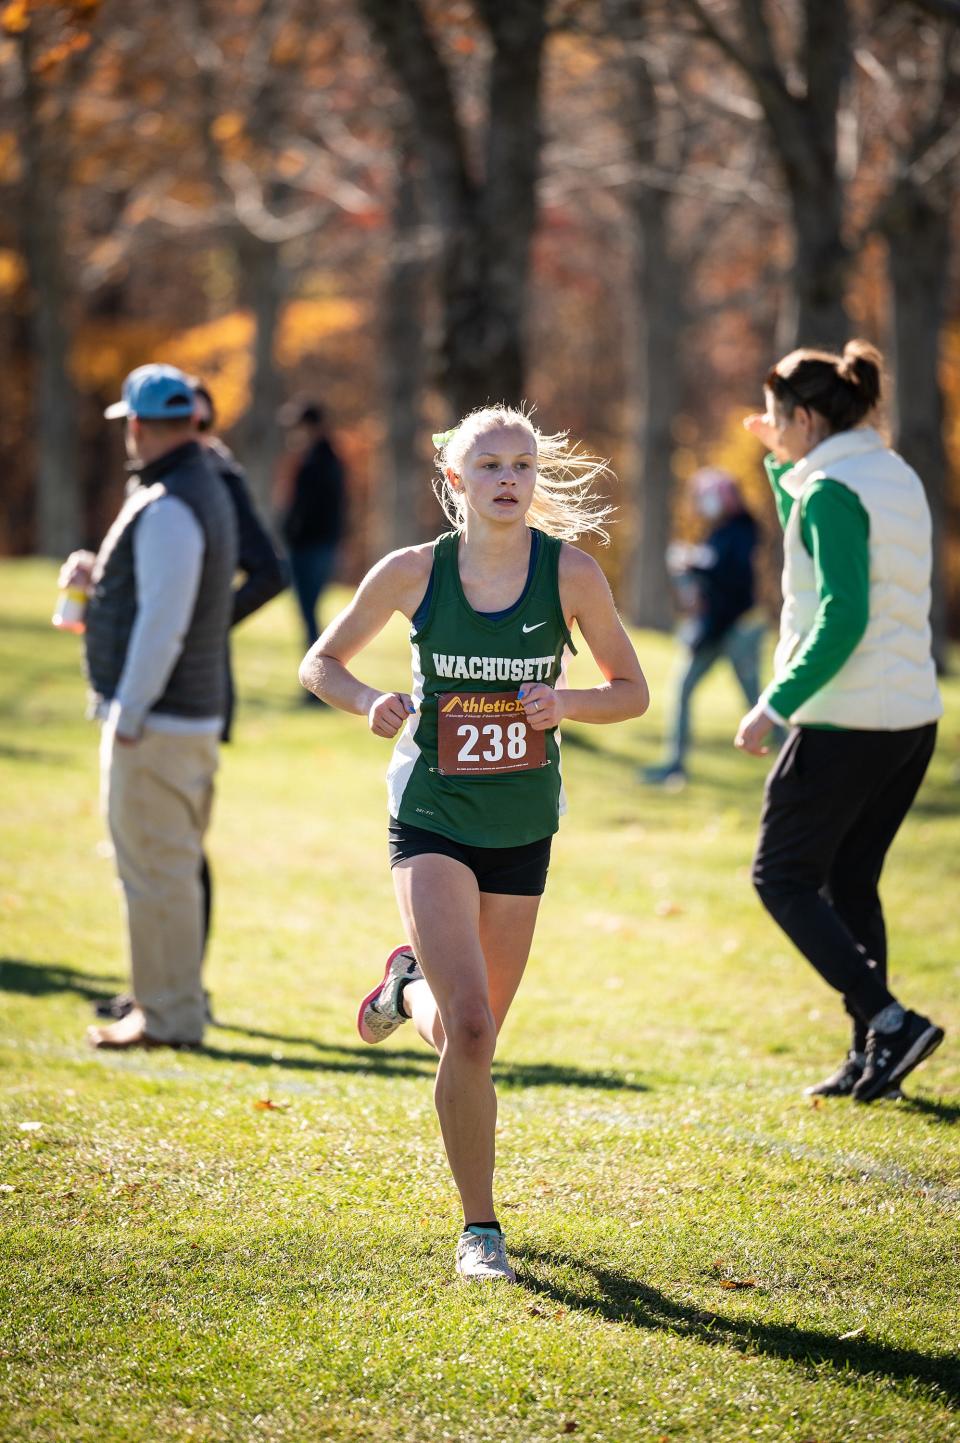 Wachusett's Ashlynn Witt takes an early lead in the Division 1 girls' race at the Central Mass. XC Championships at Gardner Municipal Golf Course.